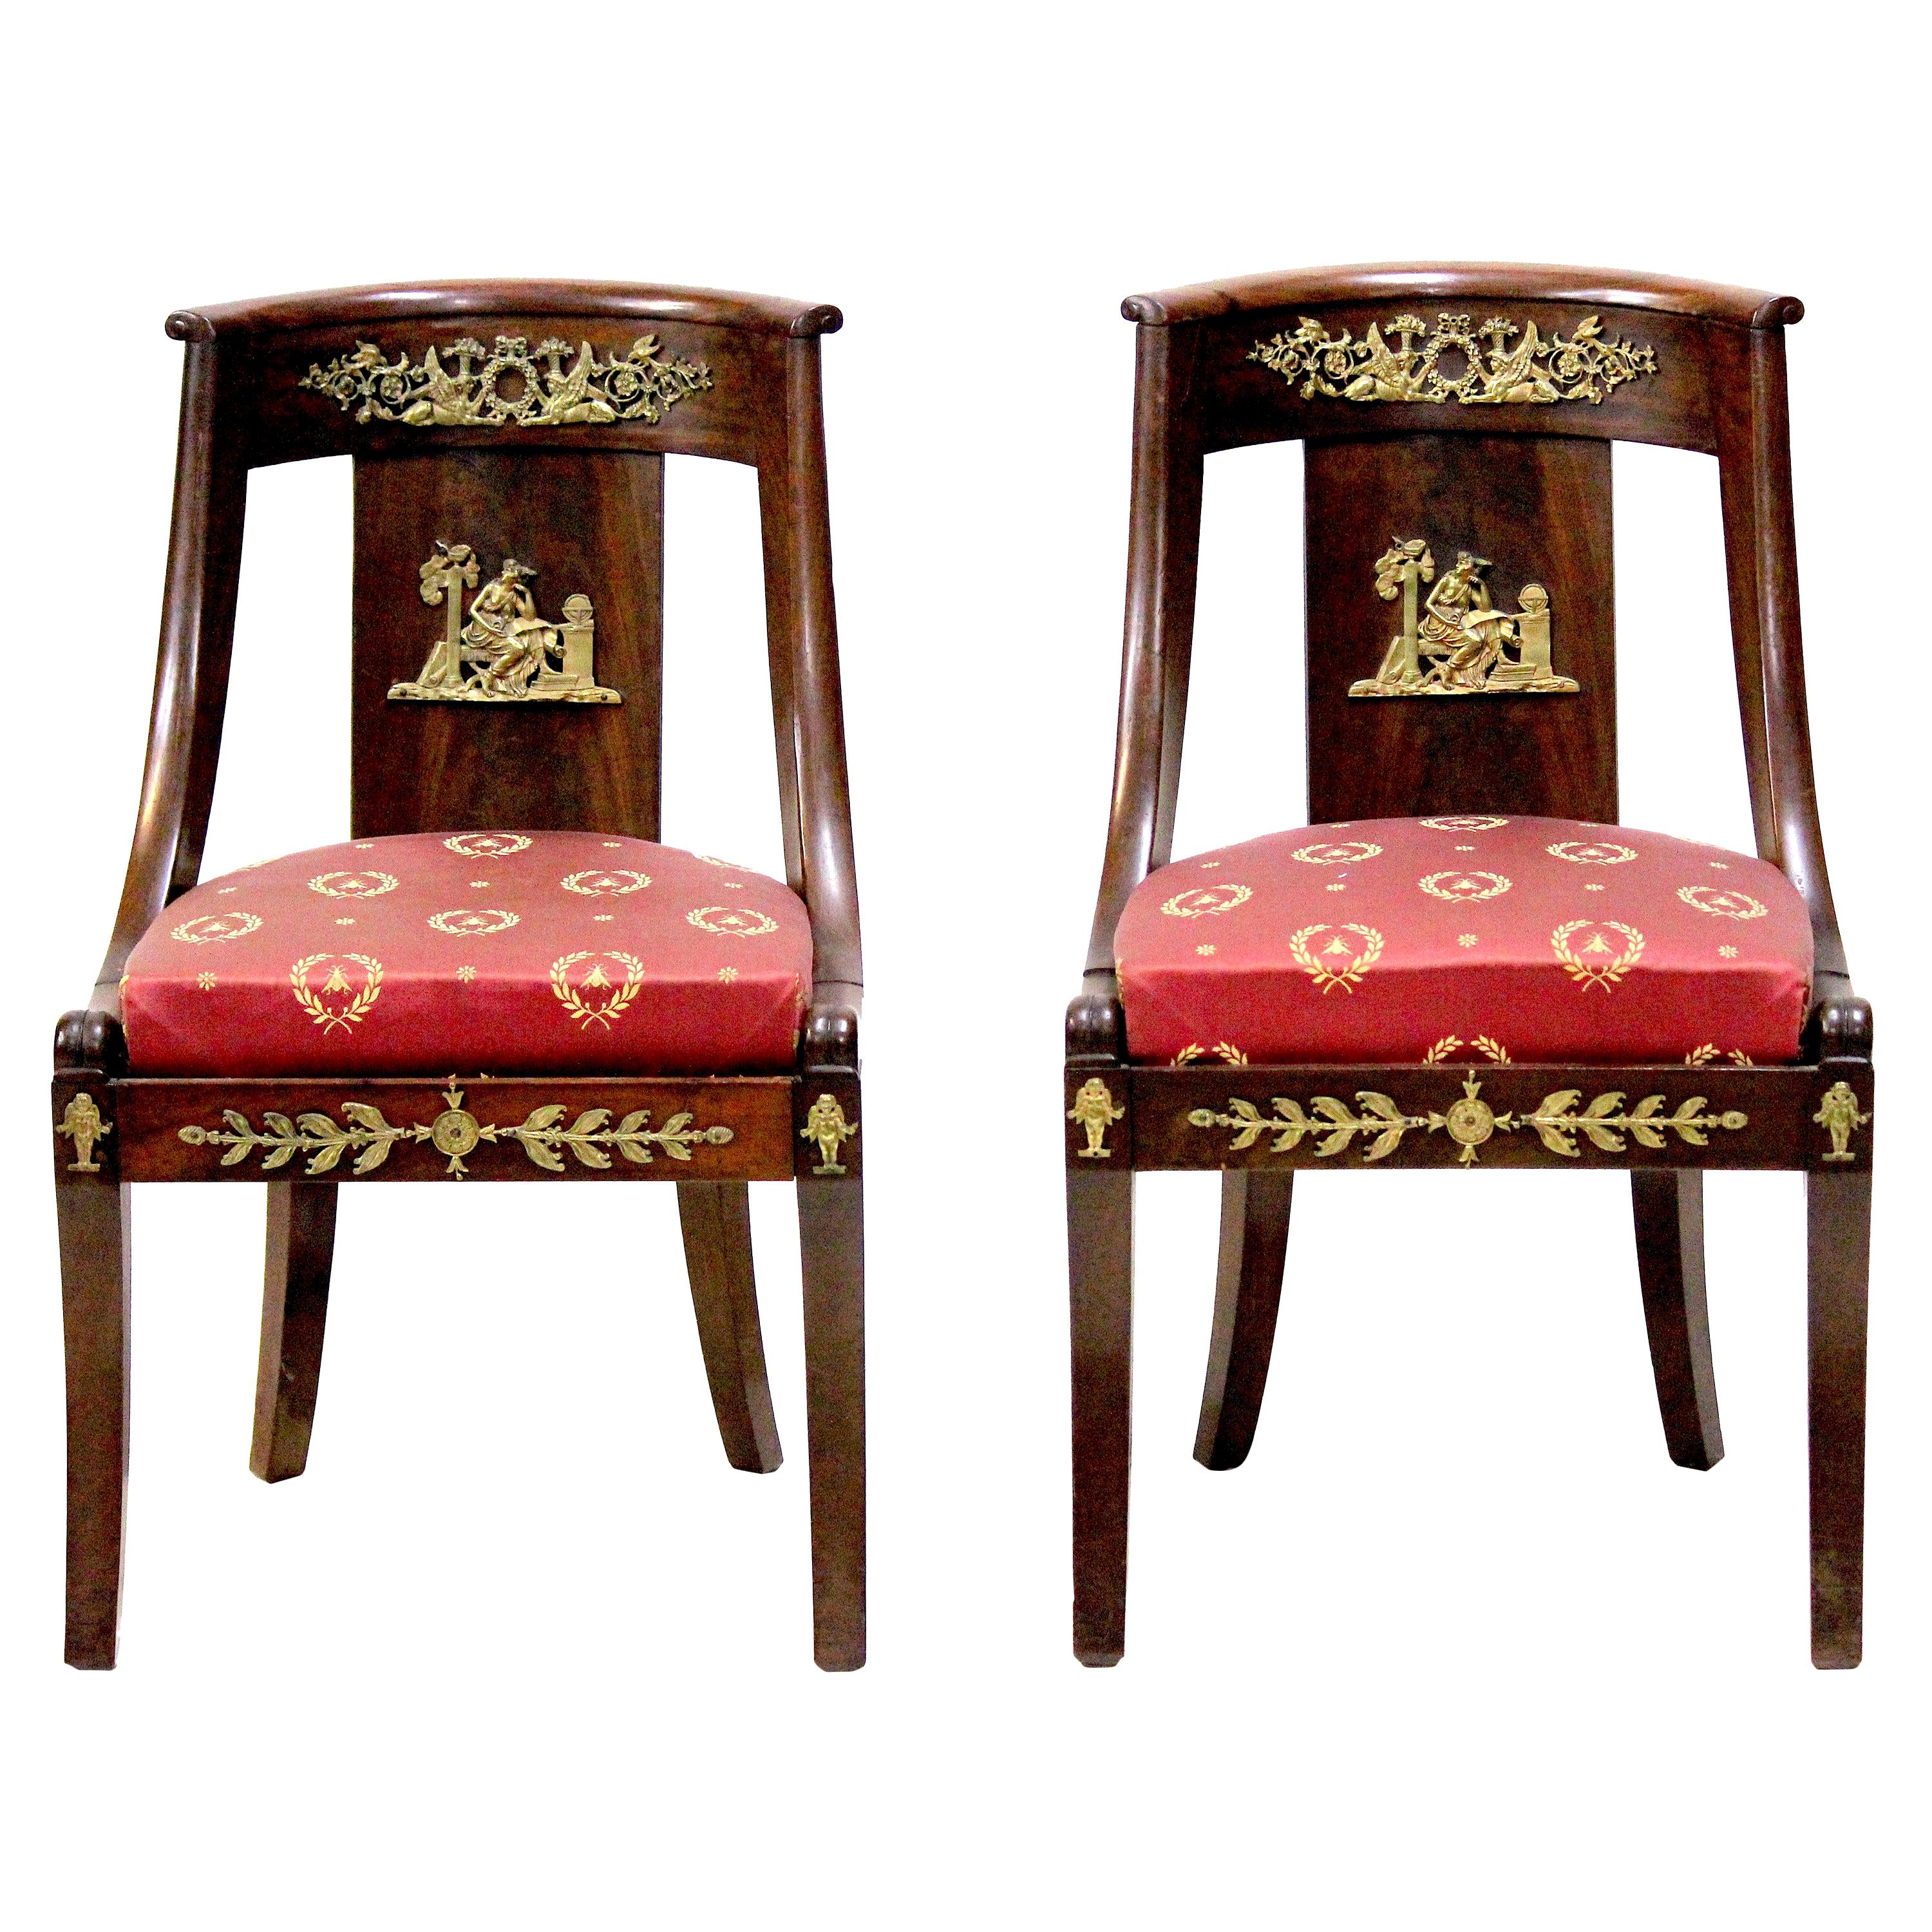 Period French Empire Chairs, circa 1815 with Famed Provenance For Sale